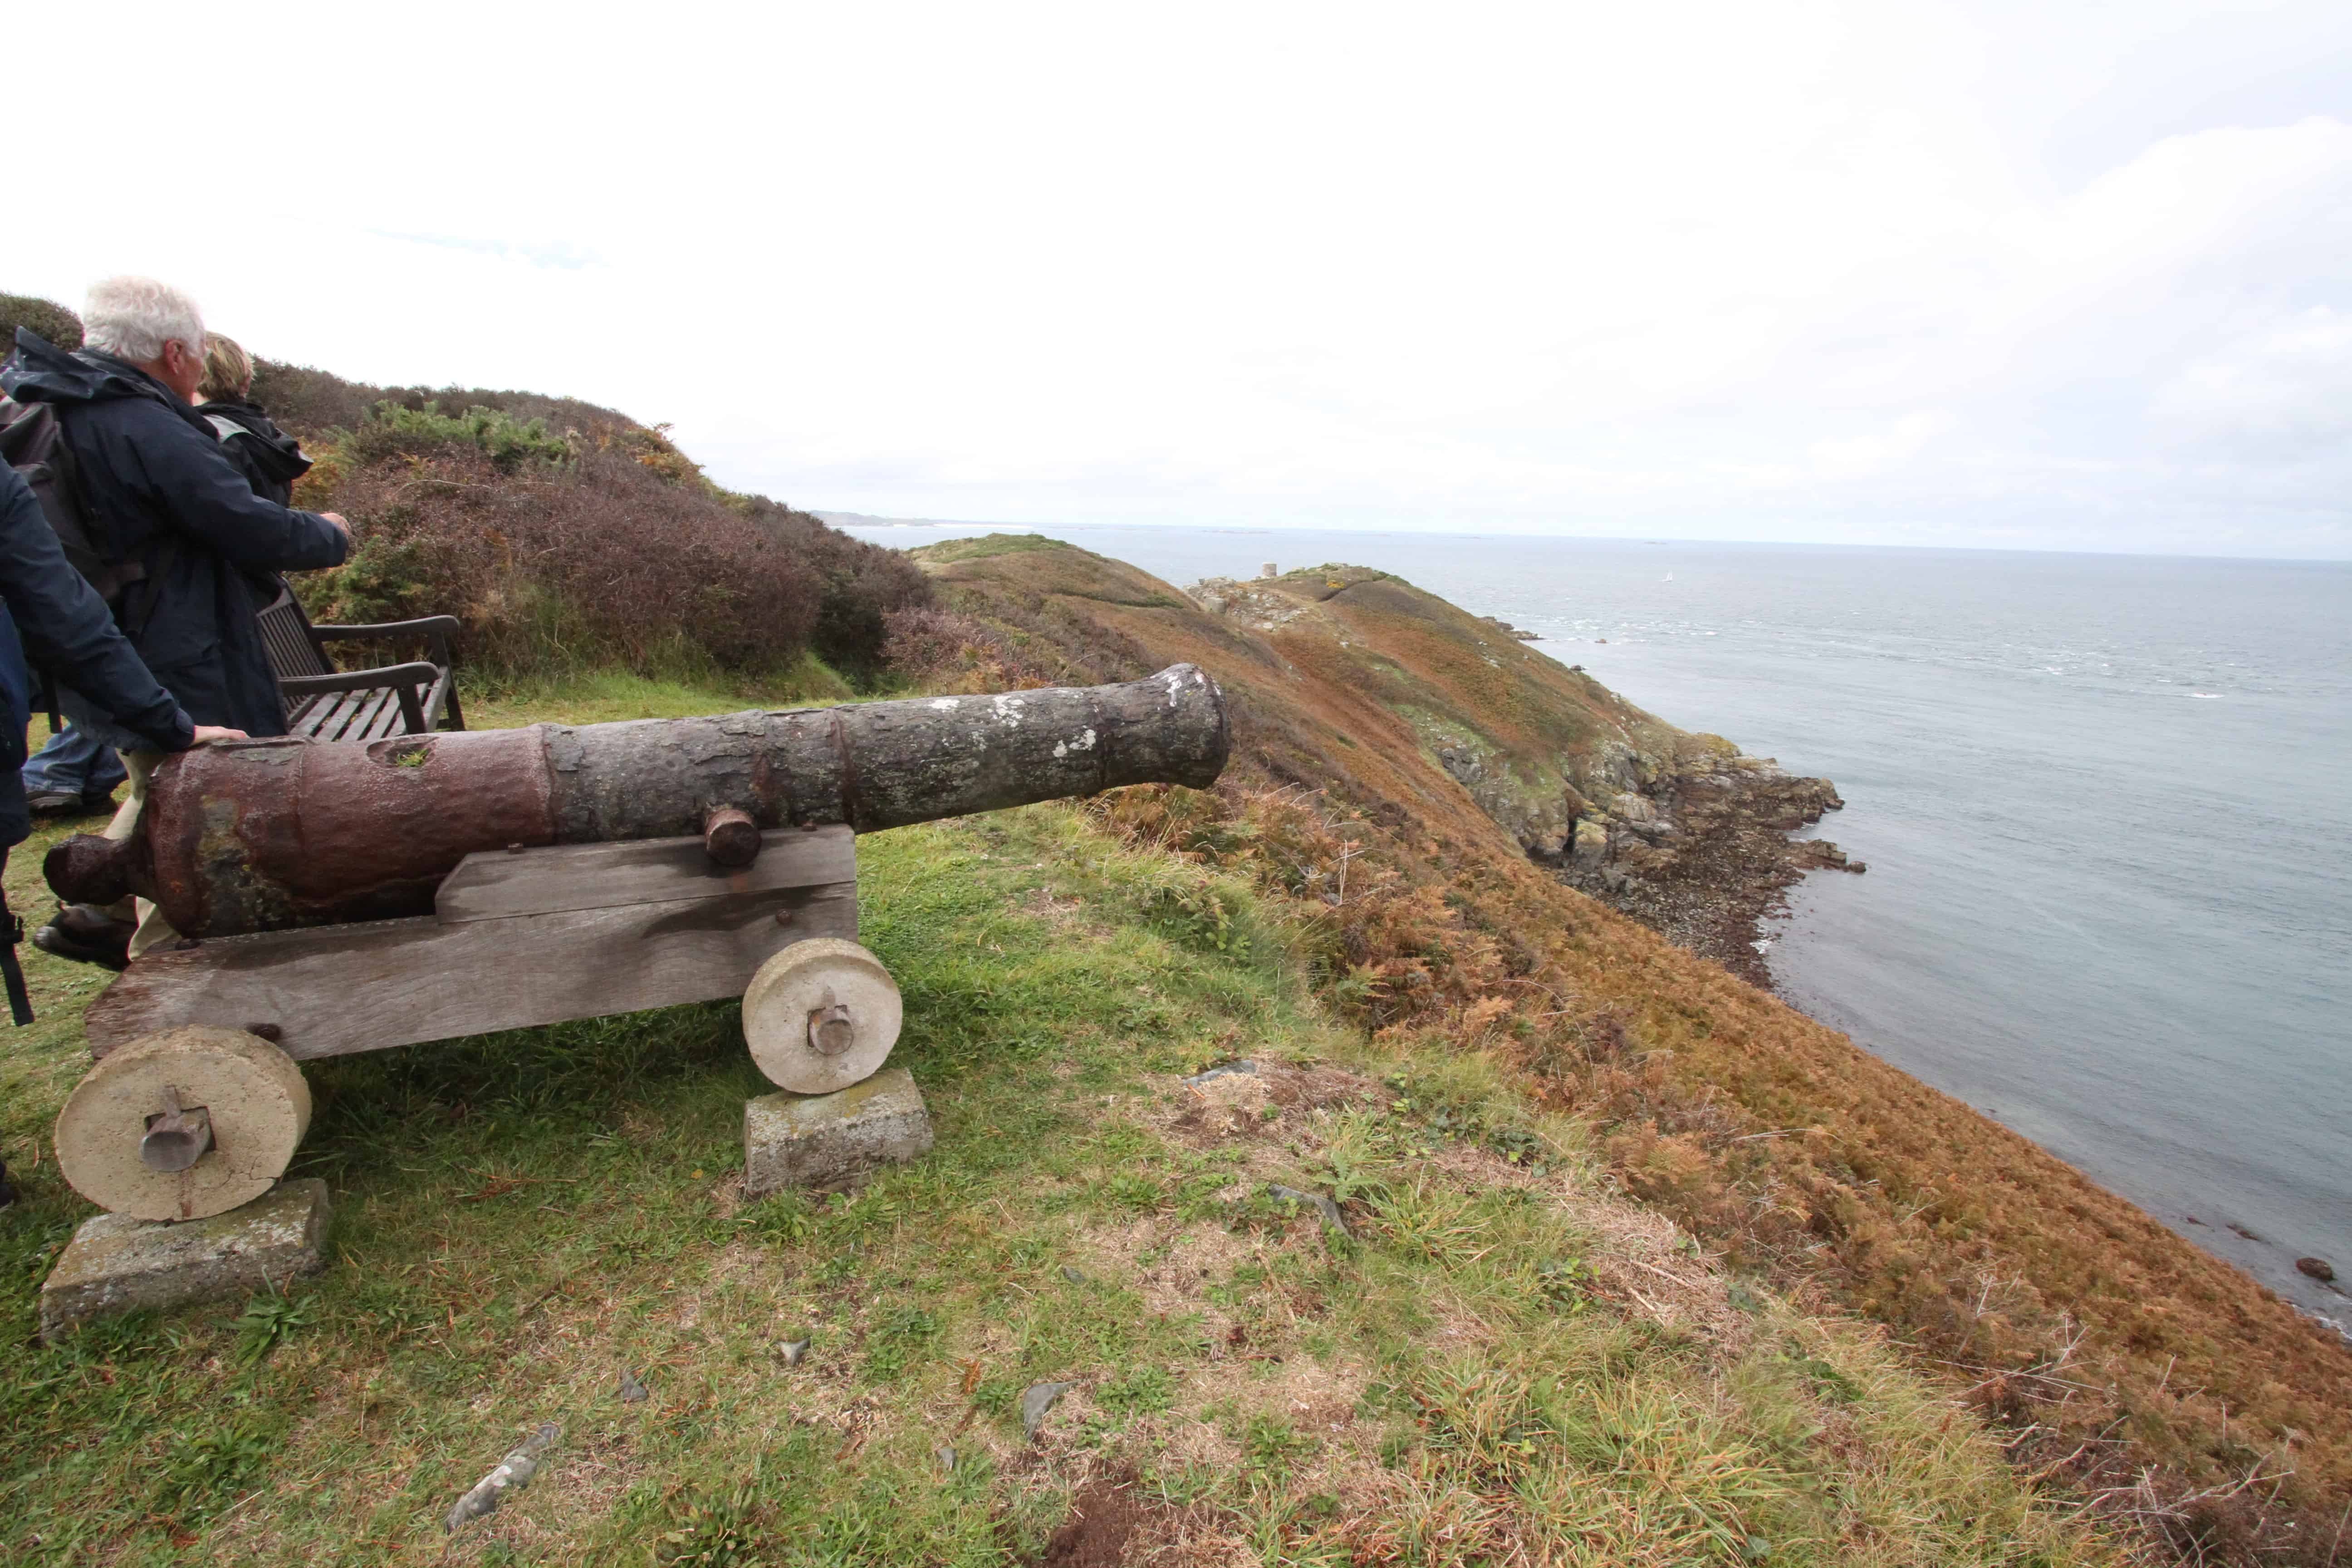 Historic defensive gun along one of the walking trails around the Island supported by La Société. Copyright: Dr Mike Pienkowski